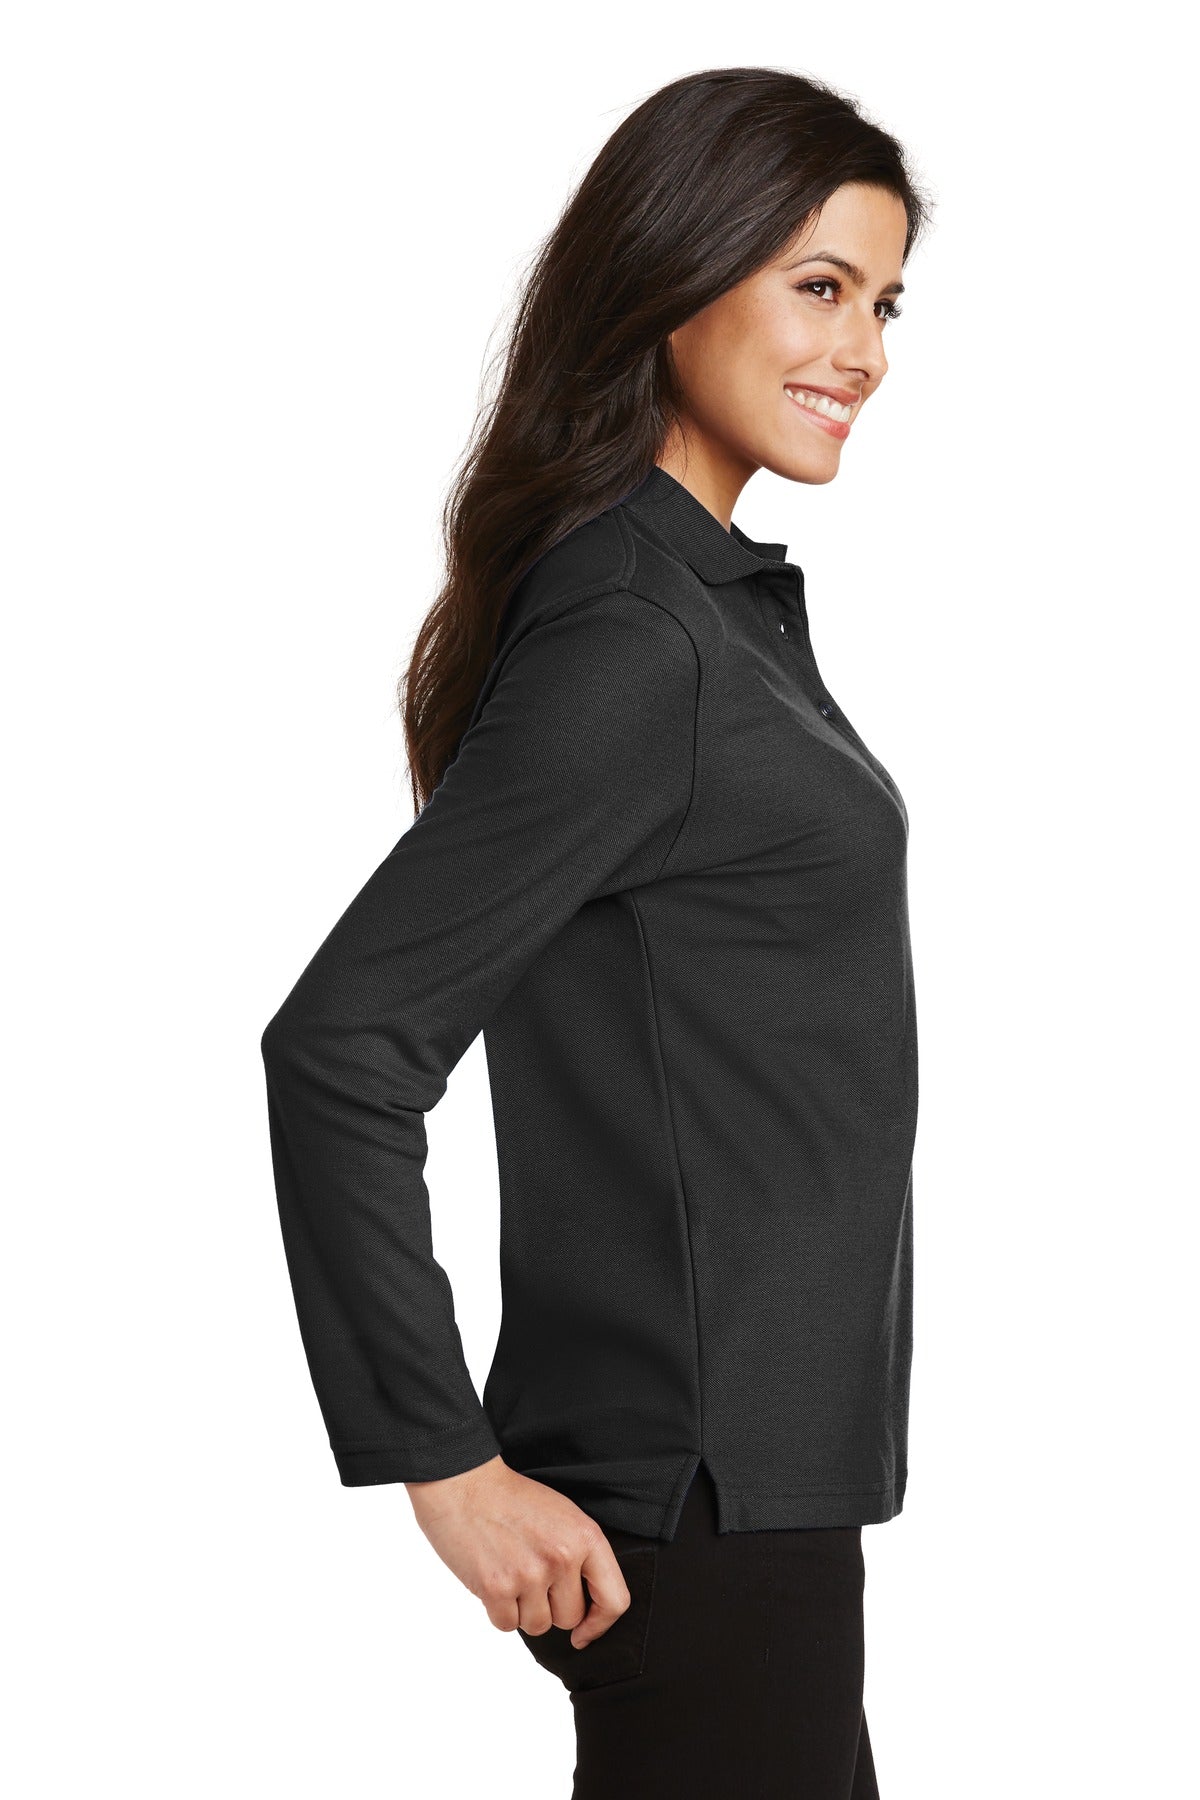 Port Authority® Ladies Silk Touch™ Long Sleeve Polo. L500LS - DFW Impression